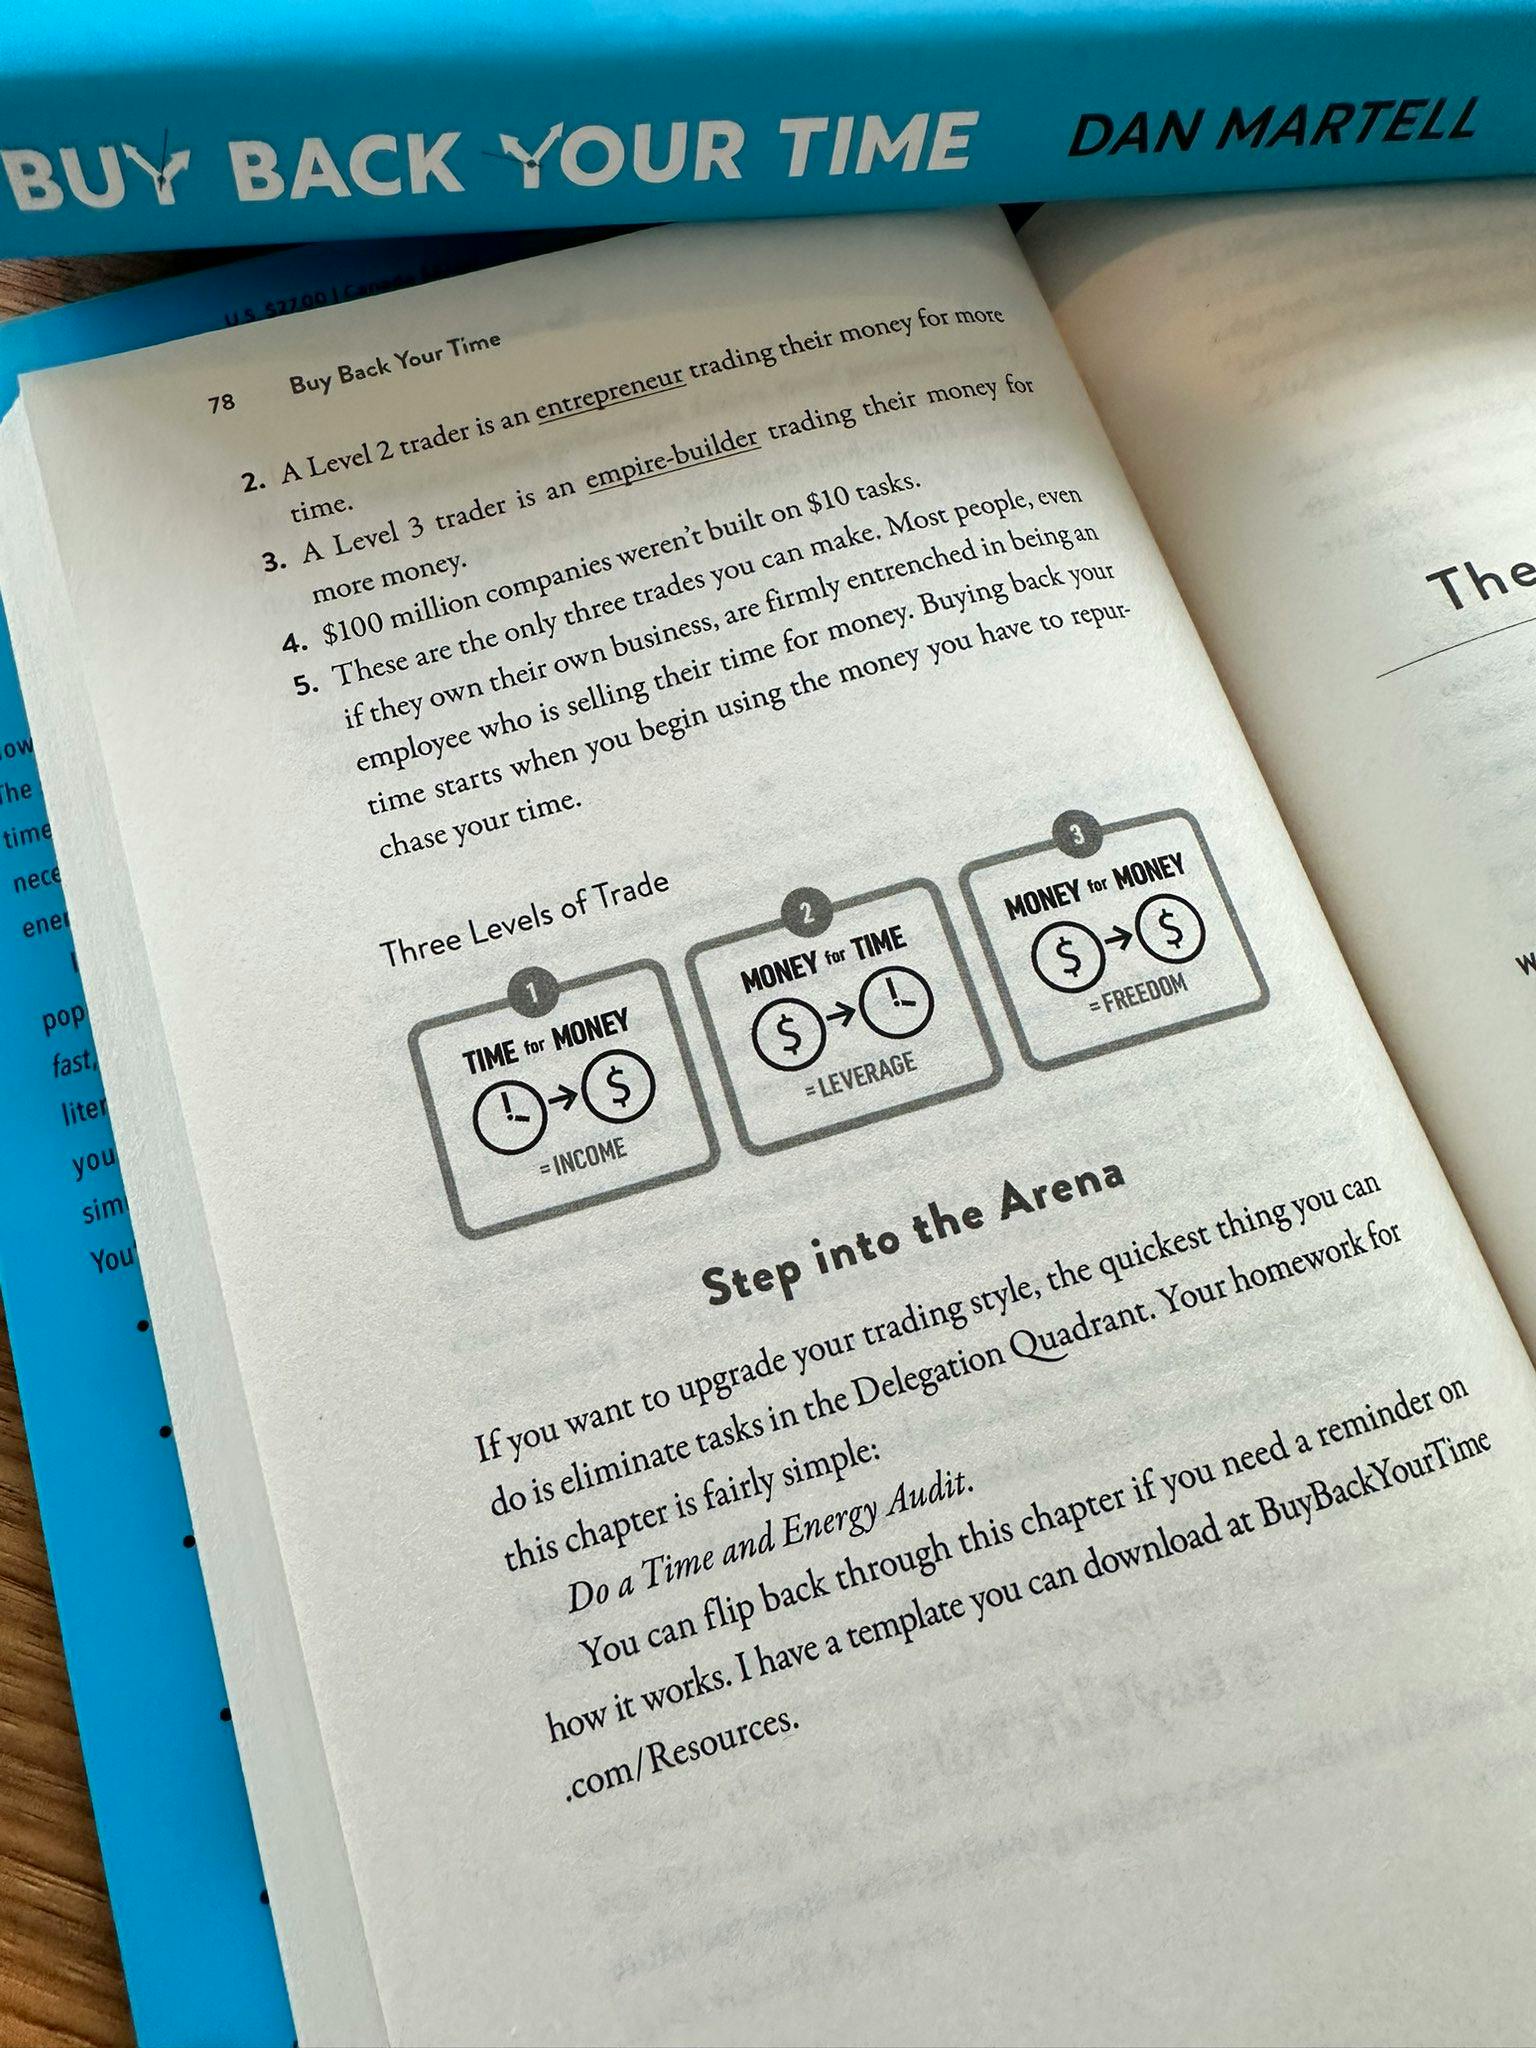 Book: Buy Back Your Time